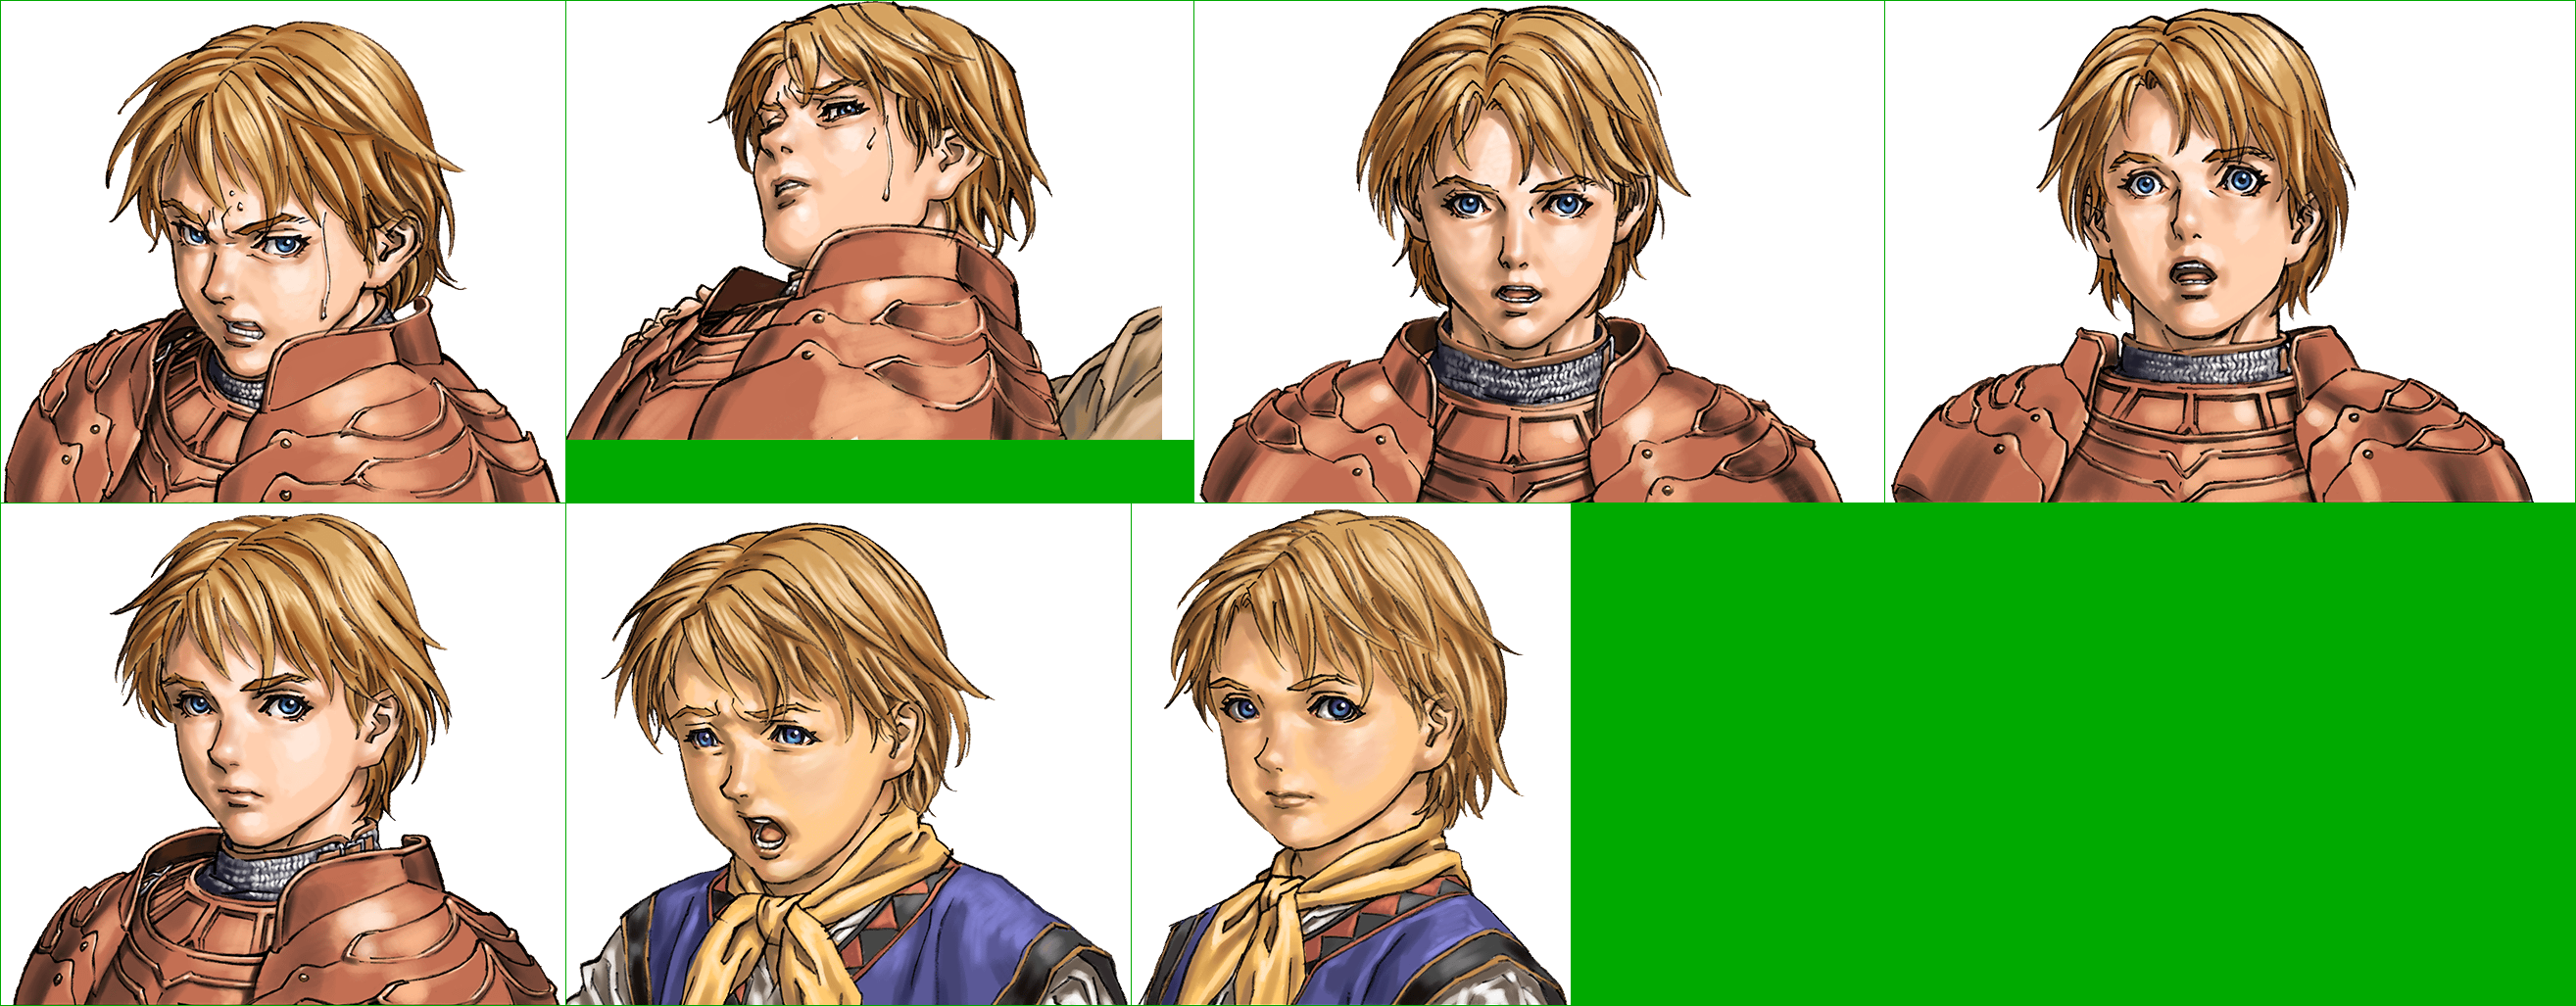 Valkyrie Profile: Lenneth - Lucius